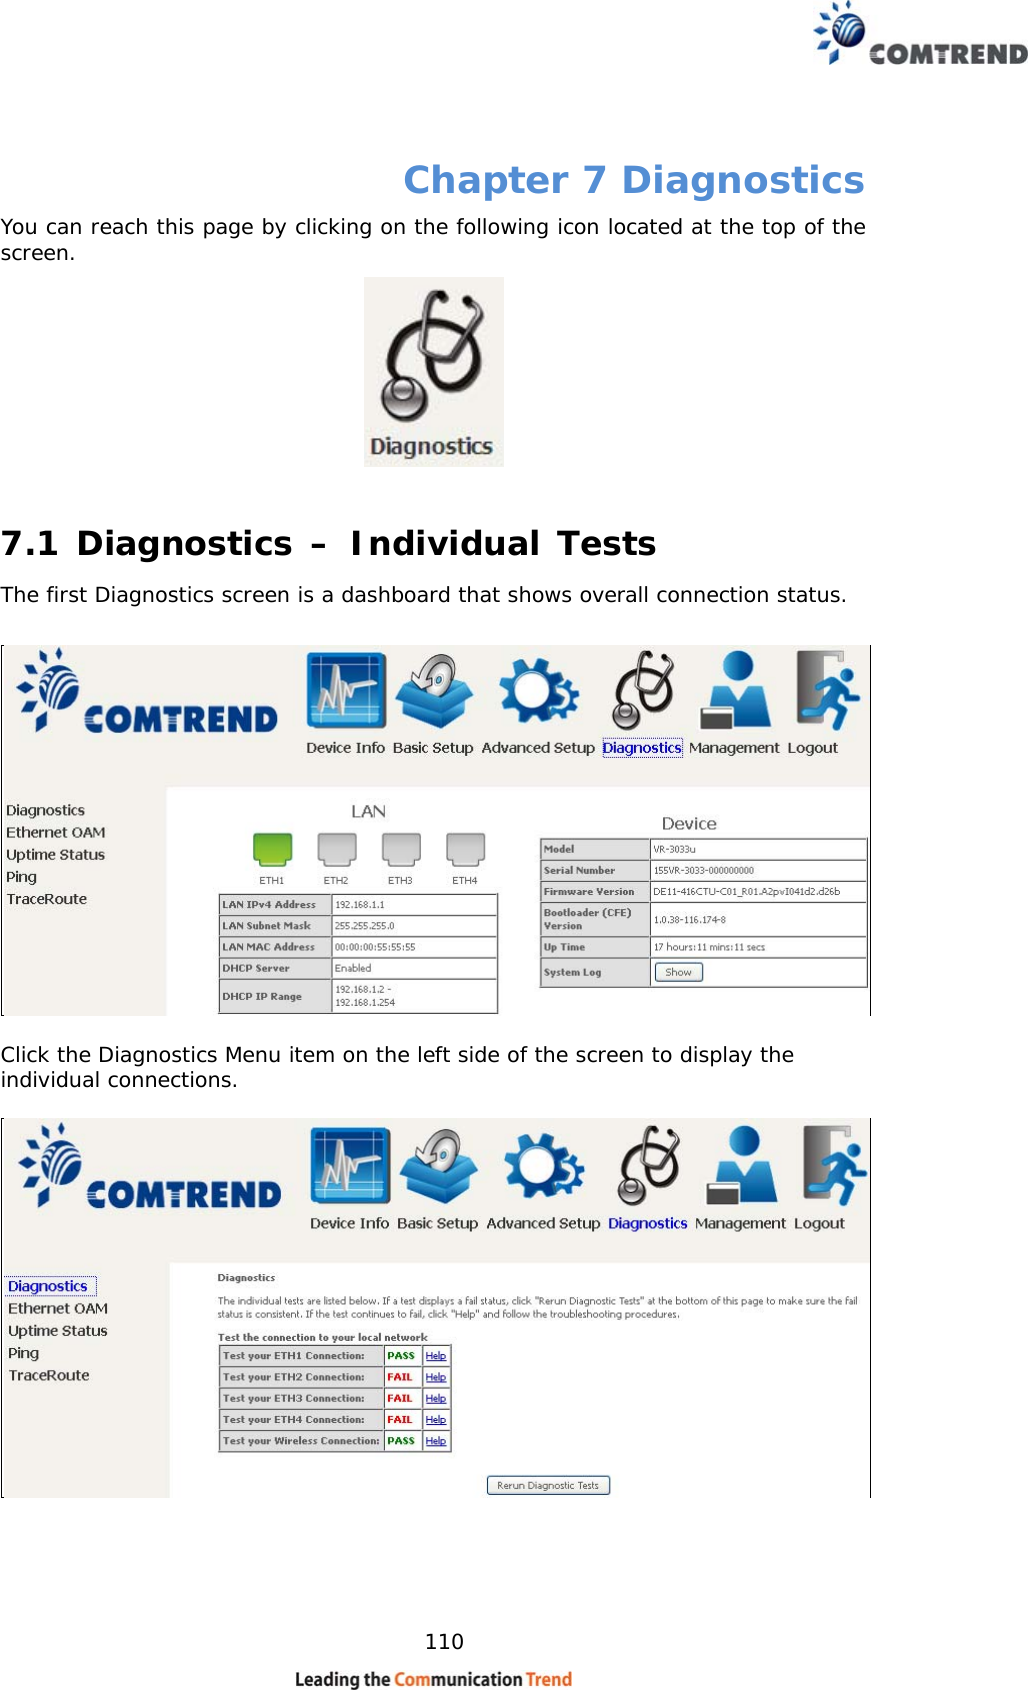    110 Chapter 7 Diagnostics You can reach this page by clicking on the following icon located at the top of the screen.  7.1 Diagnostics – Individual Tests The first Diagnostics screen is a dashboard that shows overall connection status.     Click the Diagnostics Menu item on the left side of the screen to display the individual connections.     